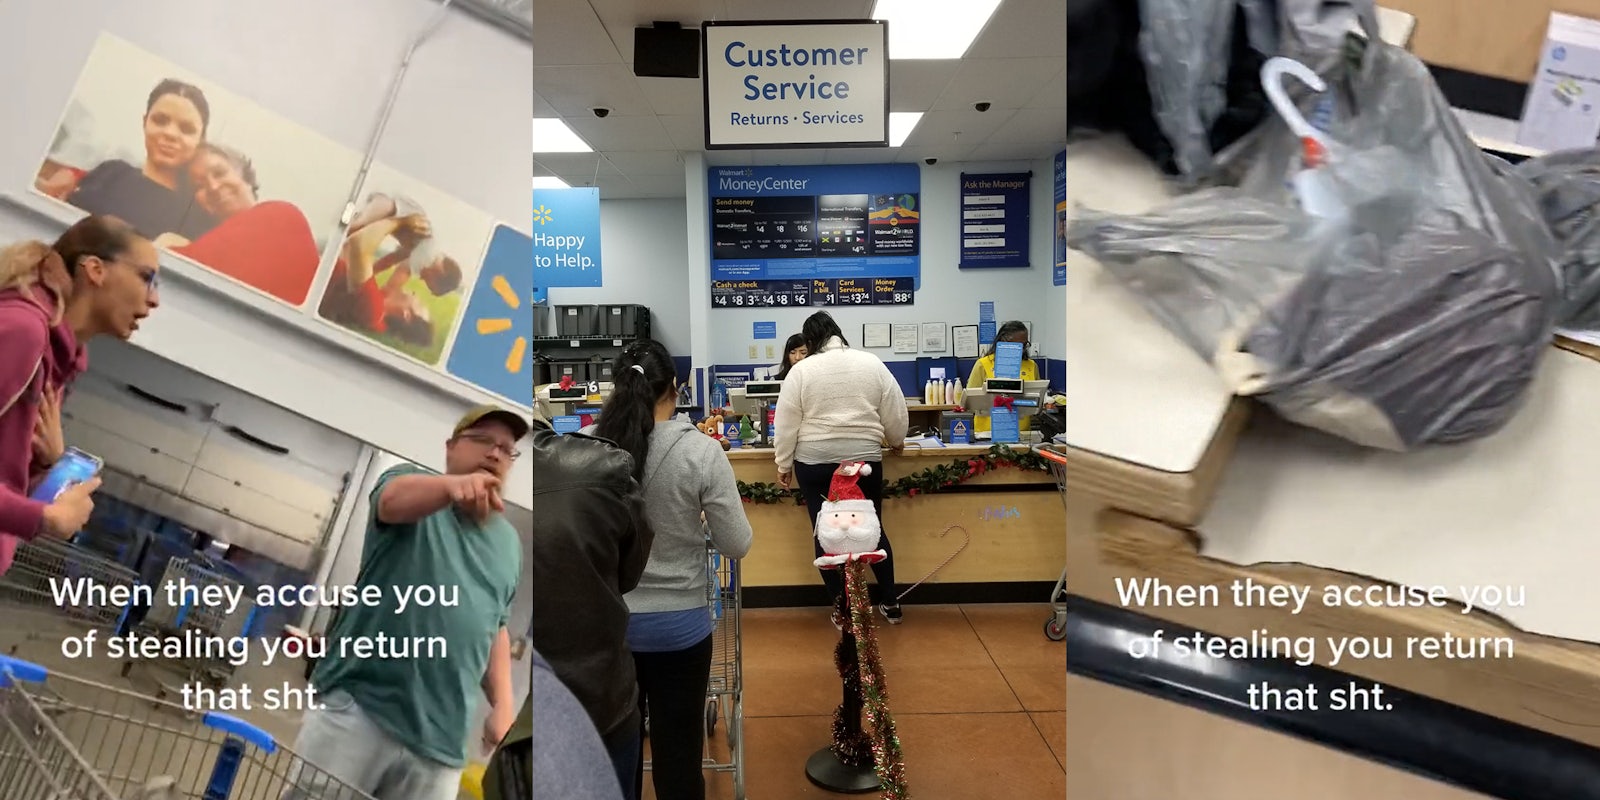 people pointing to customer in Walmart with caption 'When they accuse you of stealing you return that sht.' (l) Walmart customer service counter with customers in line (c) Walmart bags on counter in Walmart with caption 'When they accuse you of stealing you return that sht.' (r)